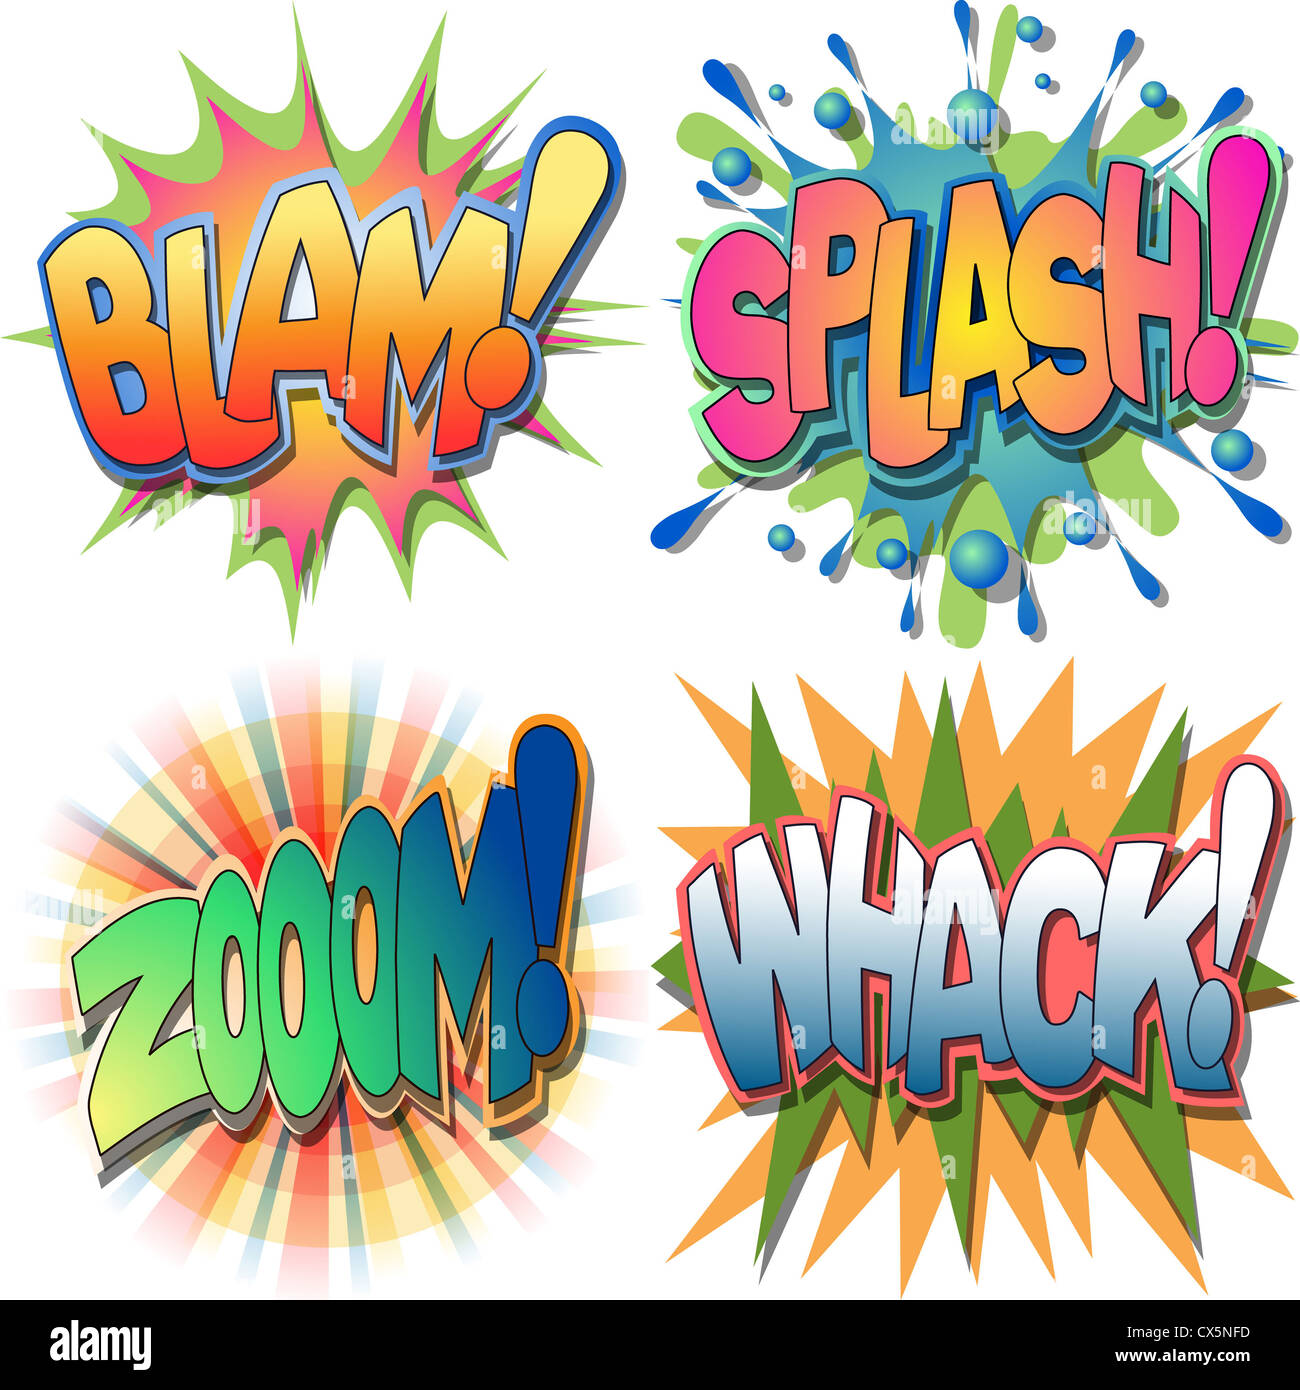 A Selection of Comic Book Exclamations and Action Word Illustrations,Blam, Splash,Zoom, Whack Stock Photo